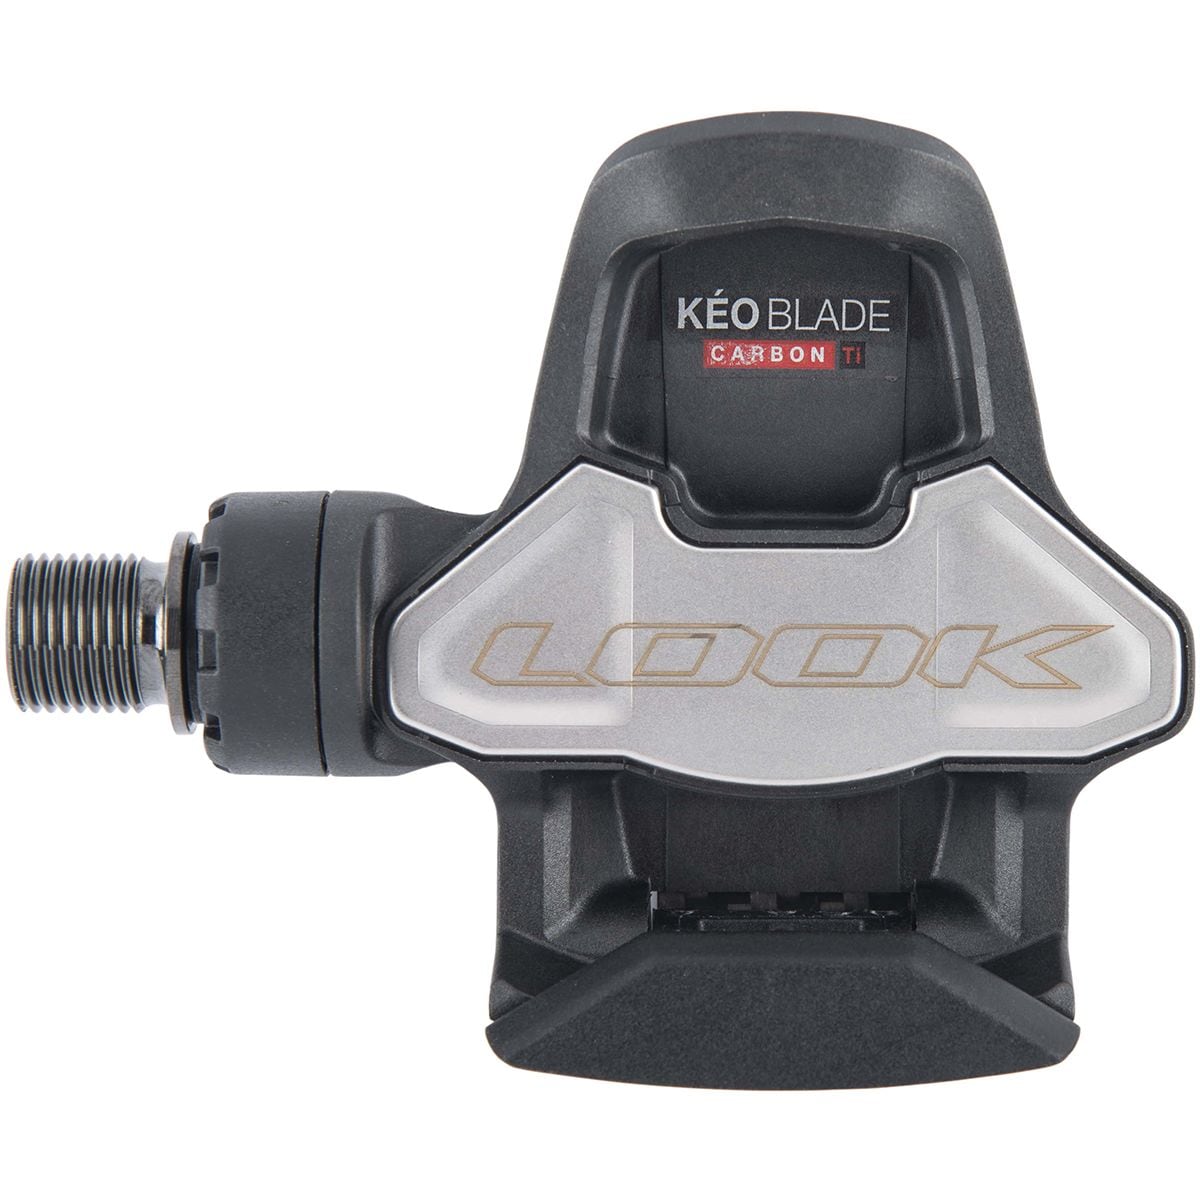 Look Cycle Keo Blade Carbon Ti Road Pedals